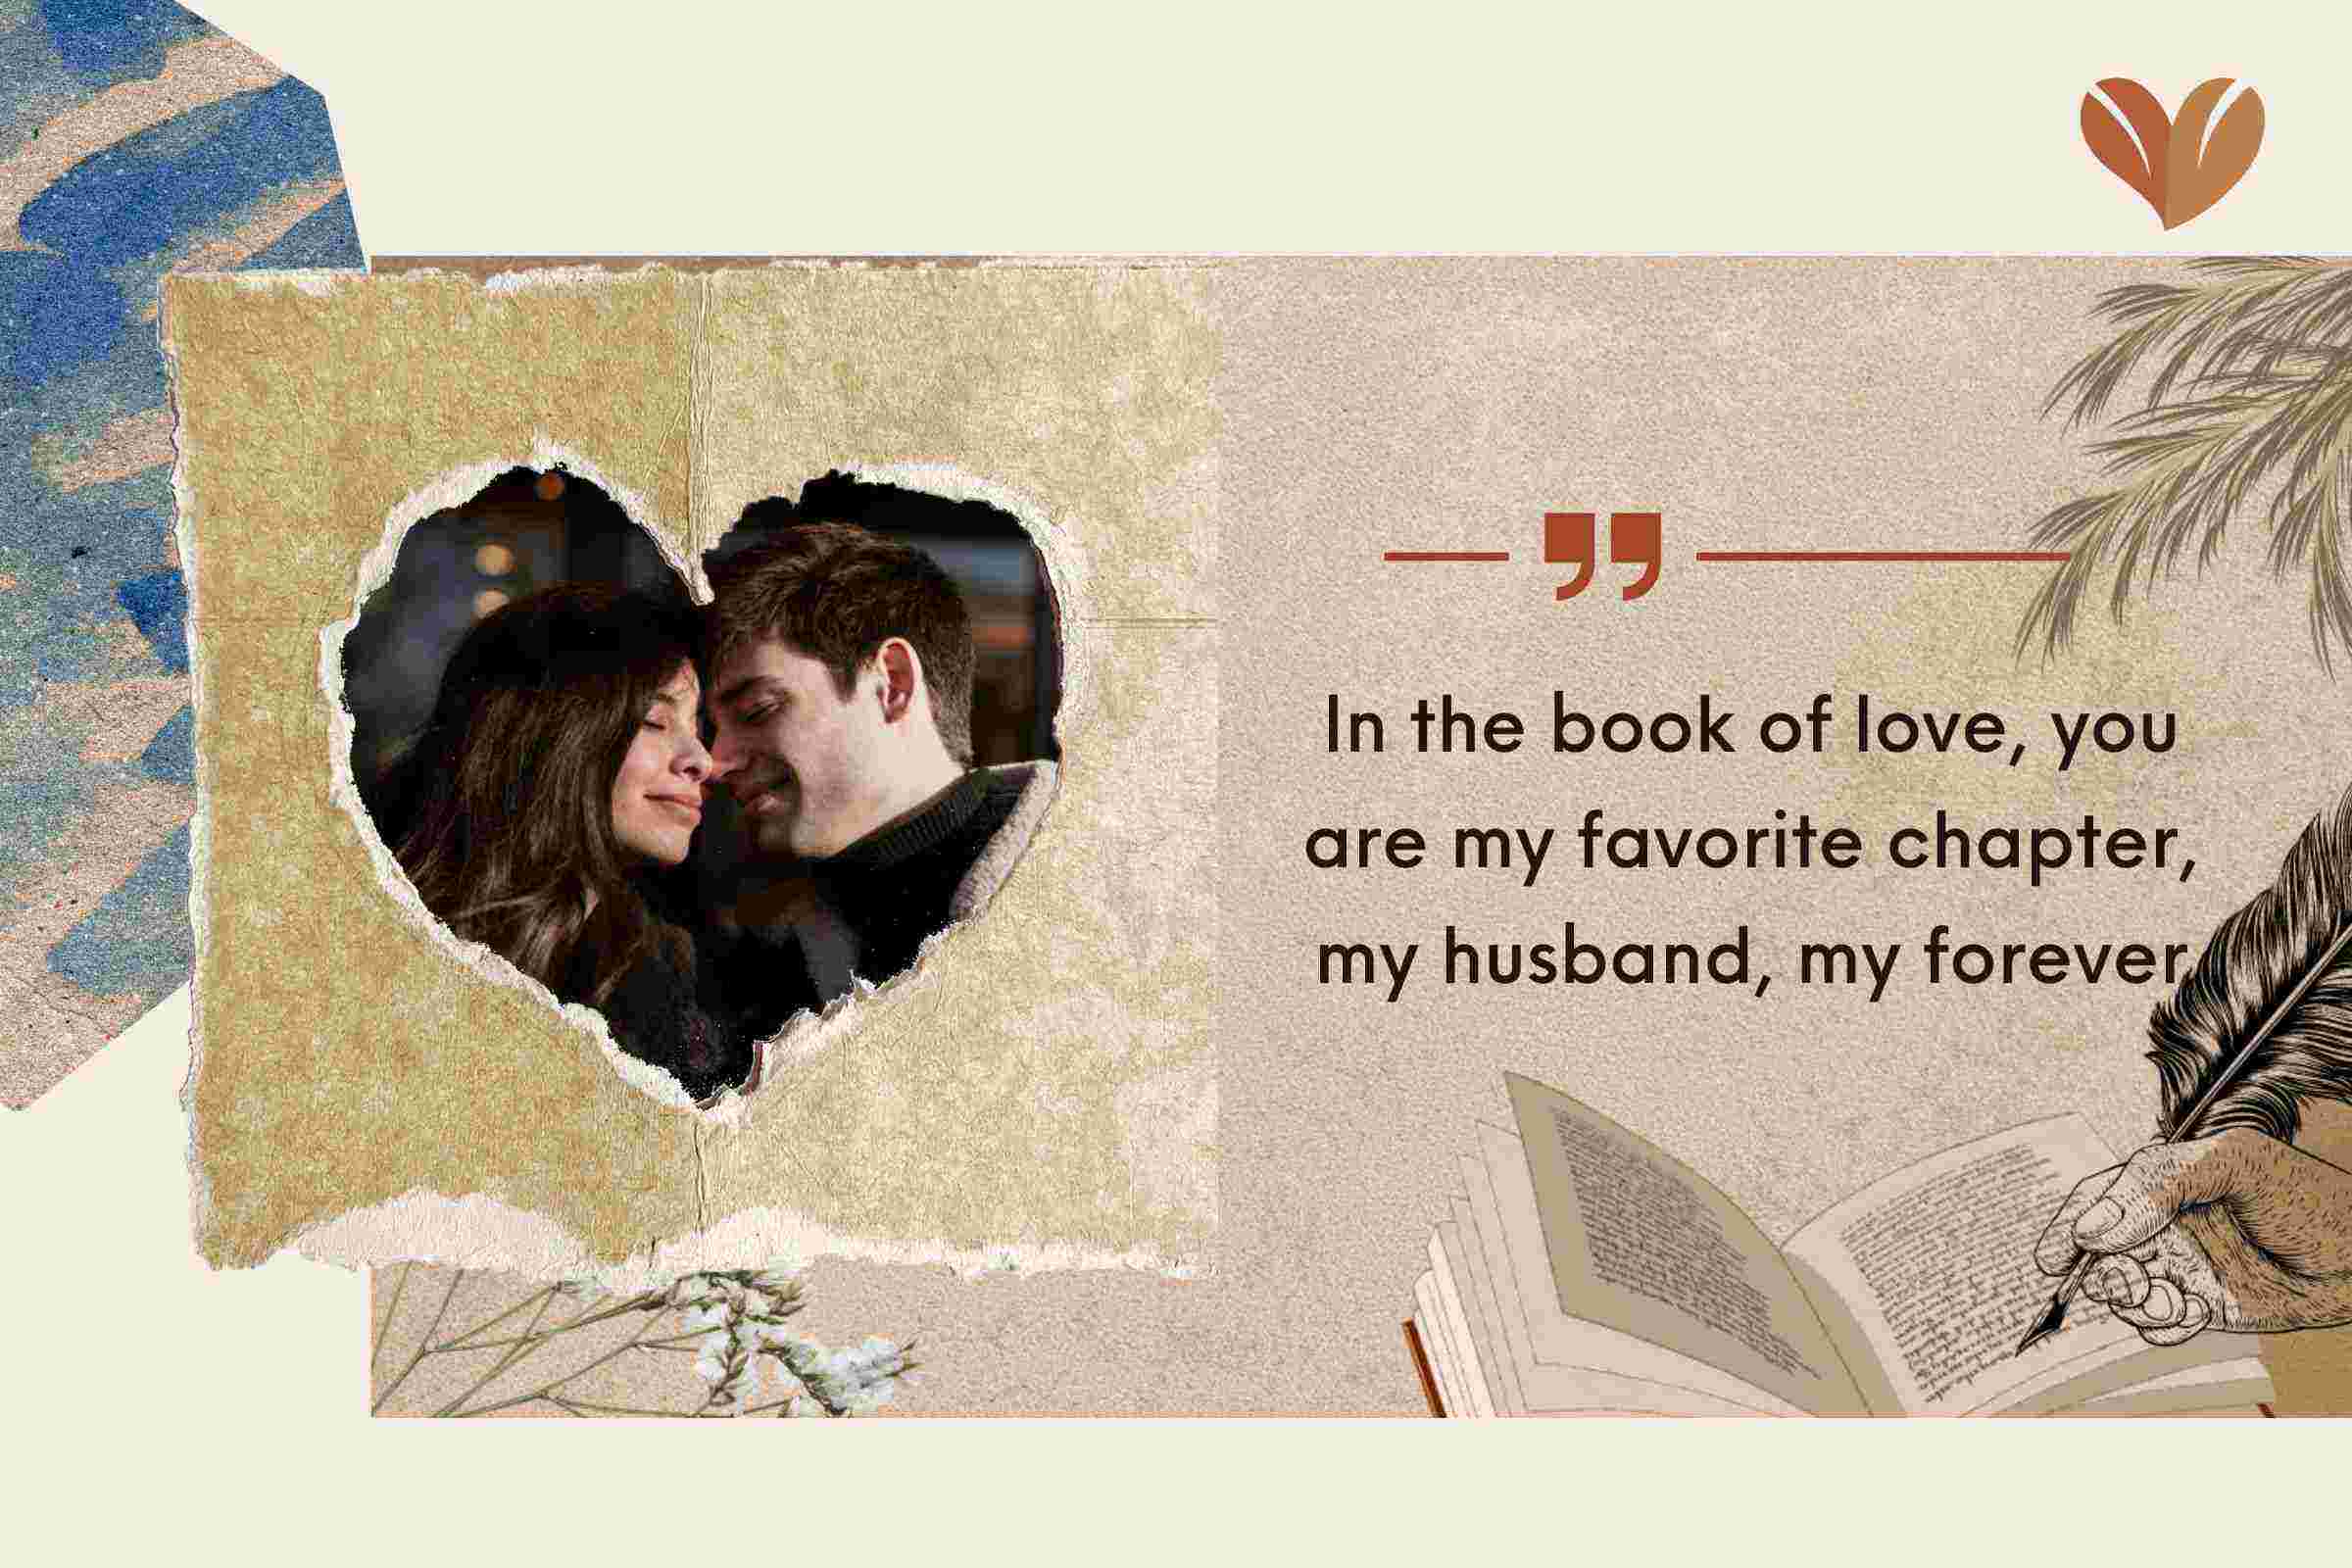 In the book of love, you are my favorite chapter, my husband, my forever.